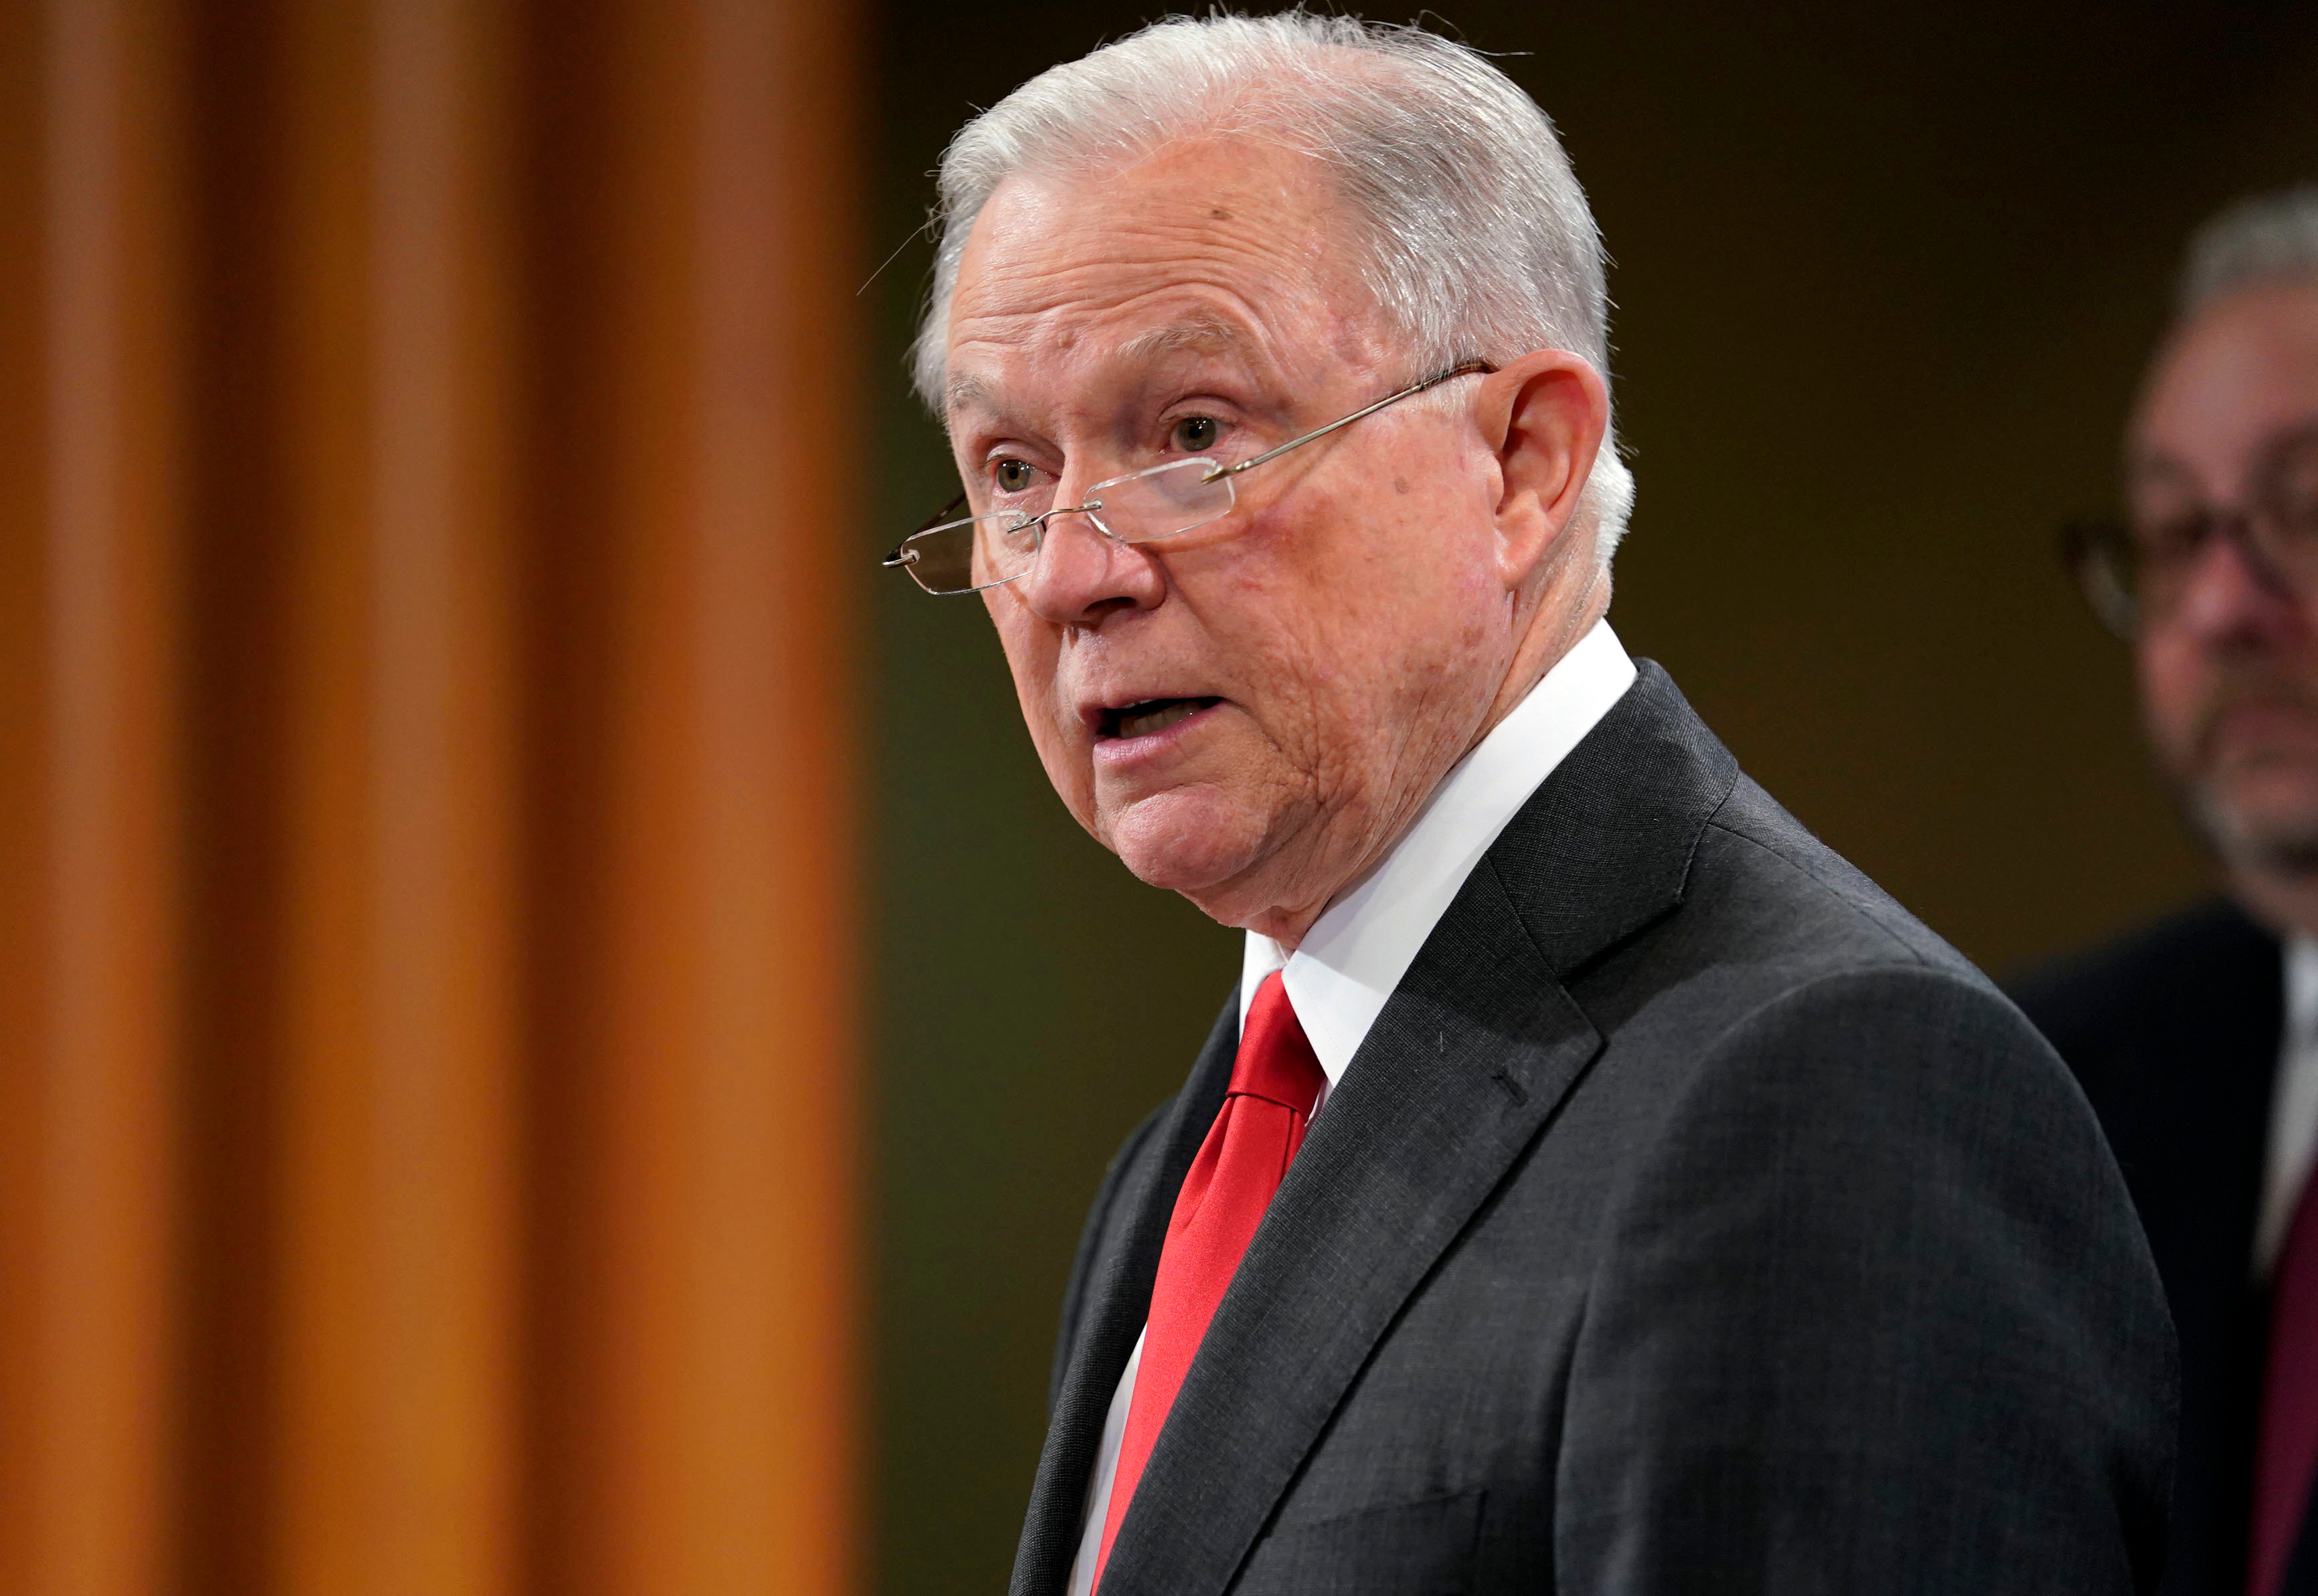 Attorney General Jeff Sessions speaks during a news conference in Washington on Nov. 1, 2018. Sessions resigned from the position on Wednesday. (Pablo Martinez Monsivais—AP/REX/Shutterstock)